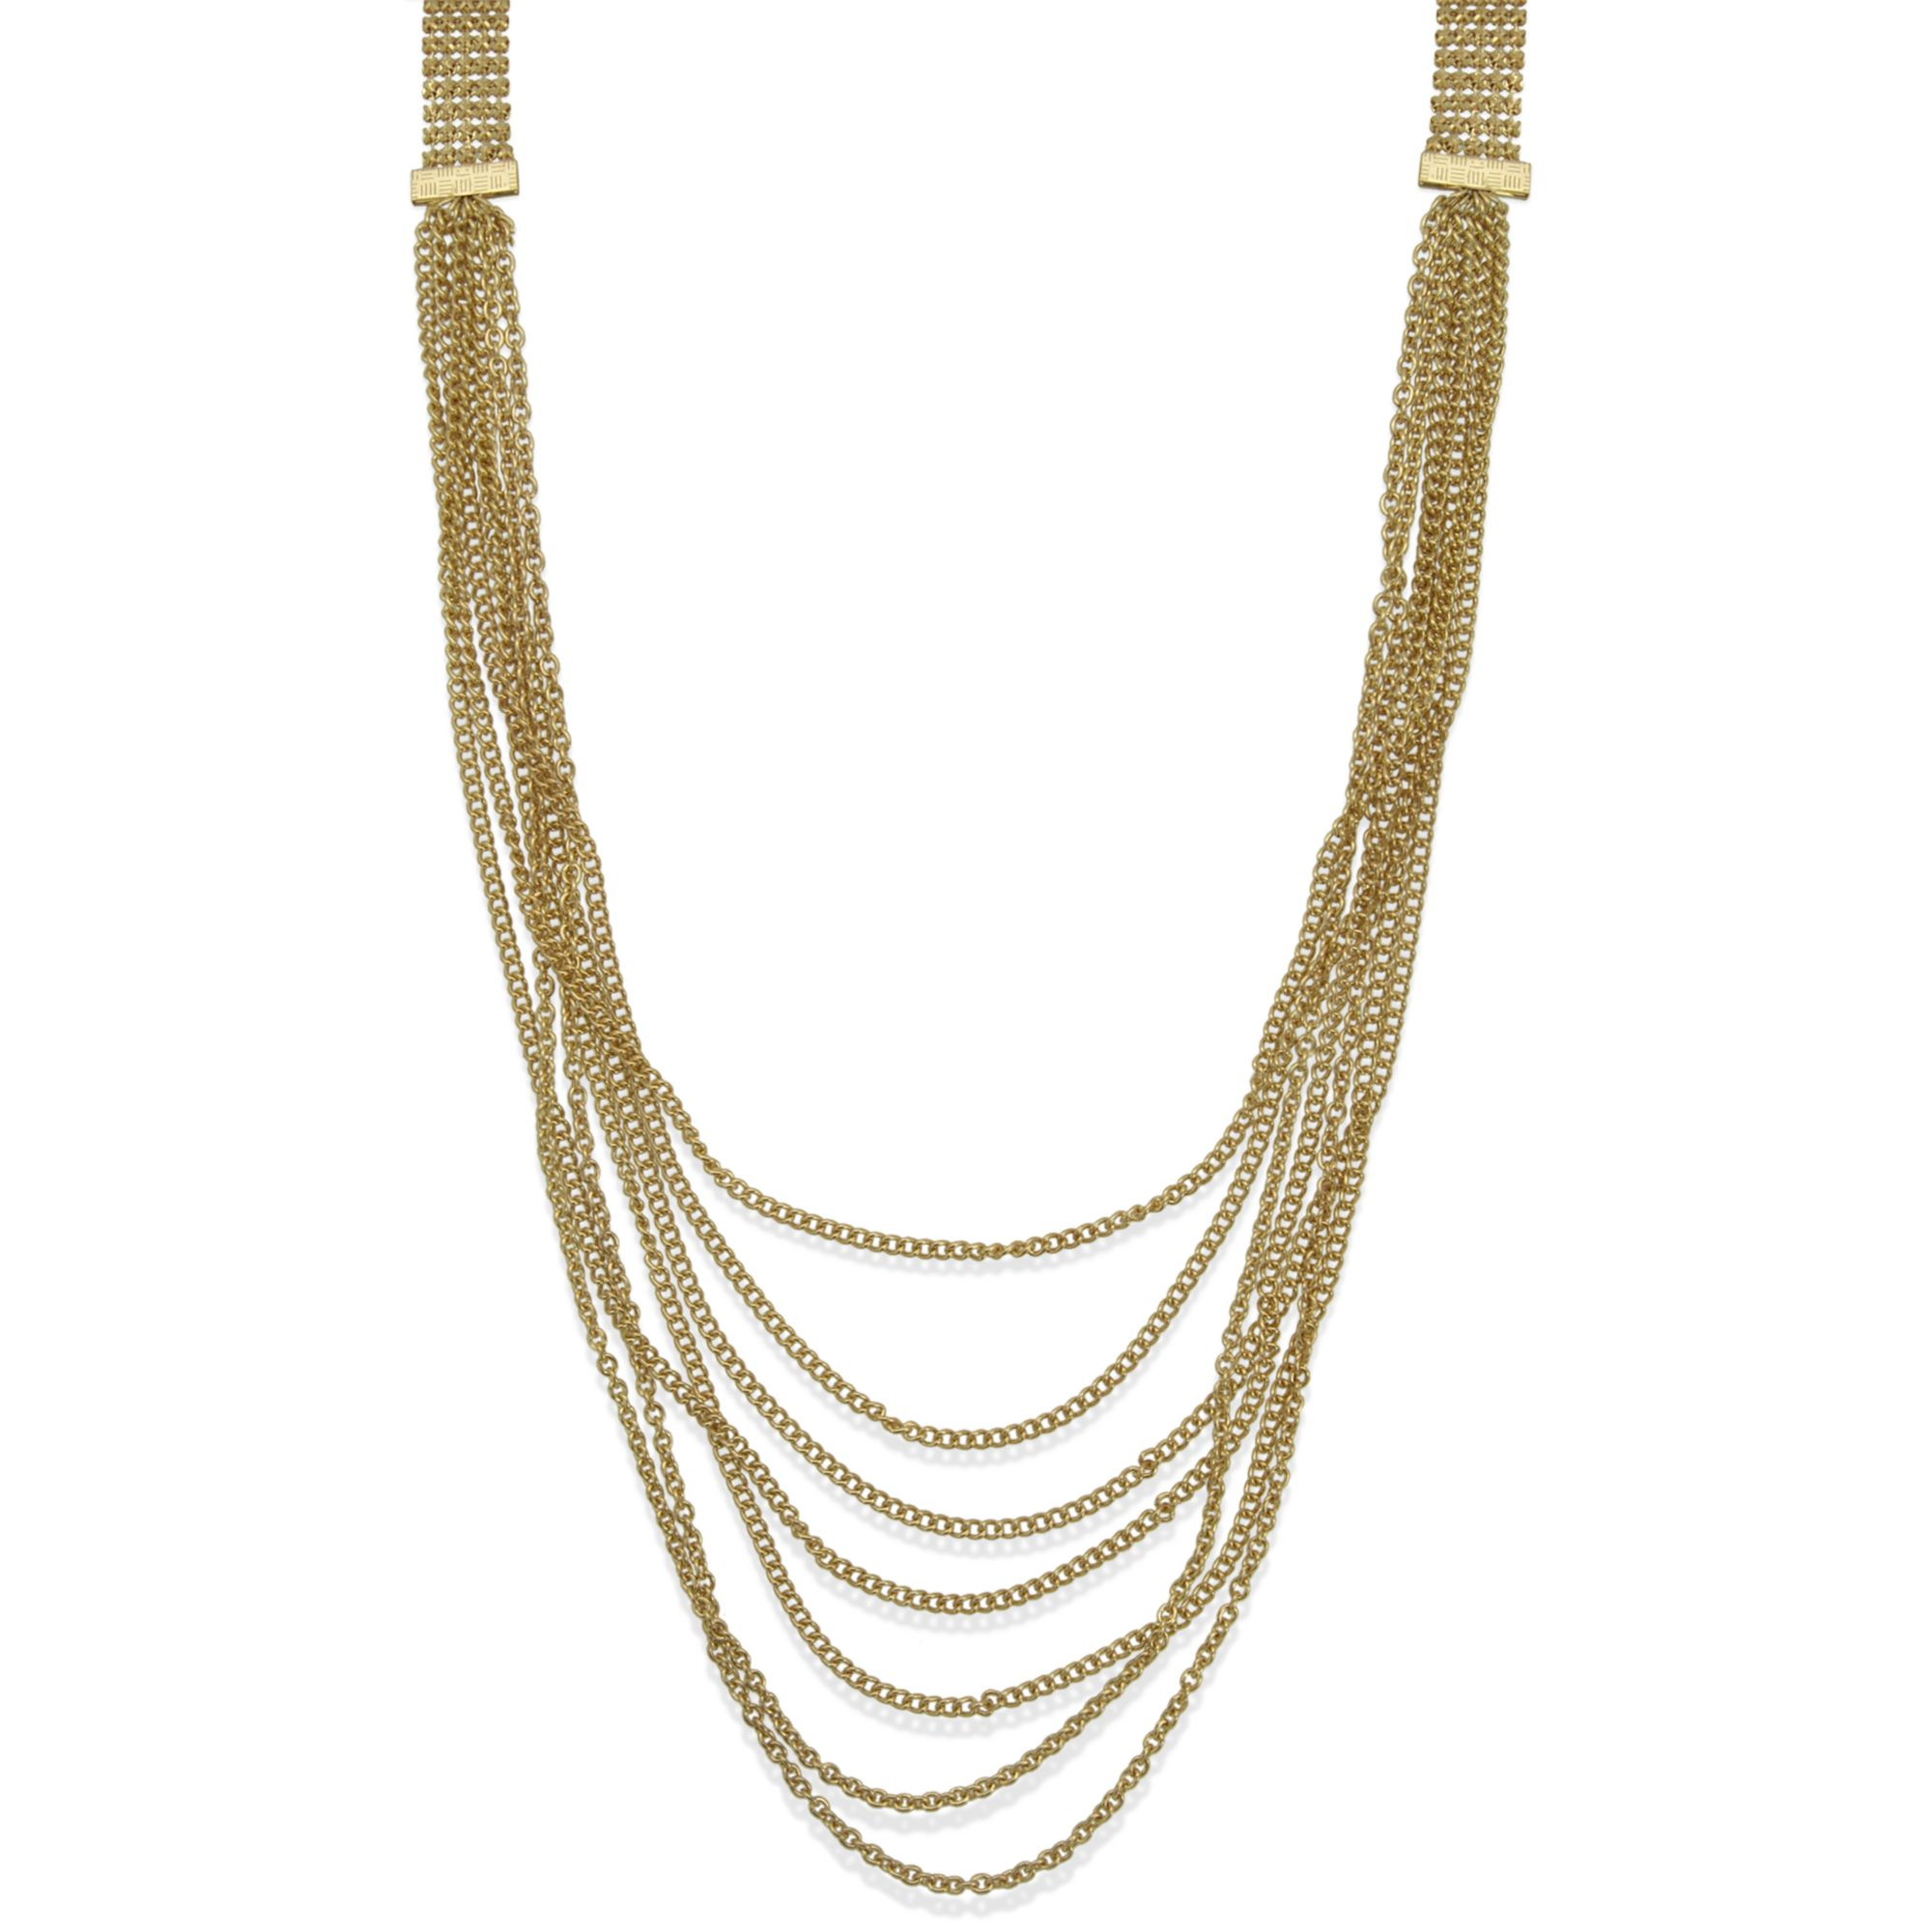 Guess Necklace Goldtone Multirow Chain Necklace in Gold | Lyst